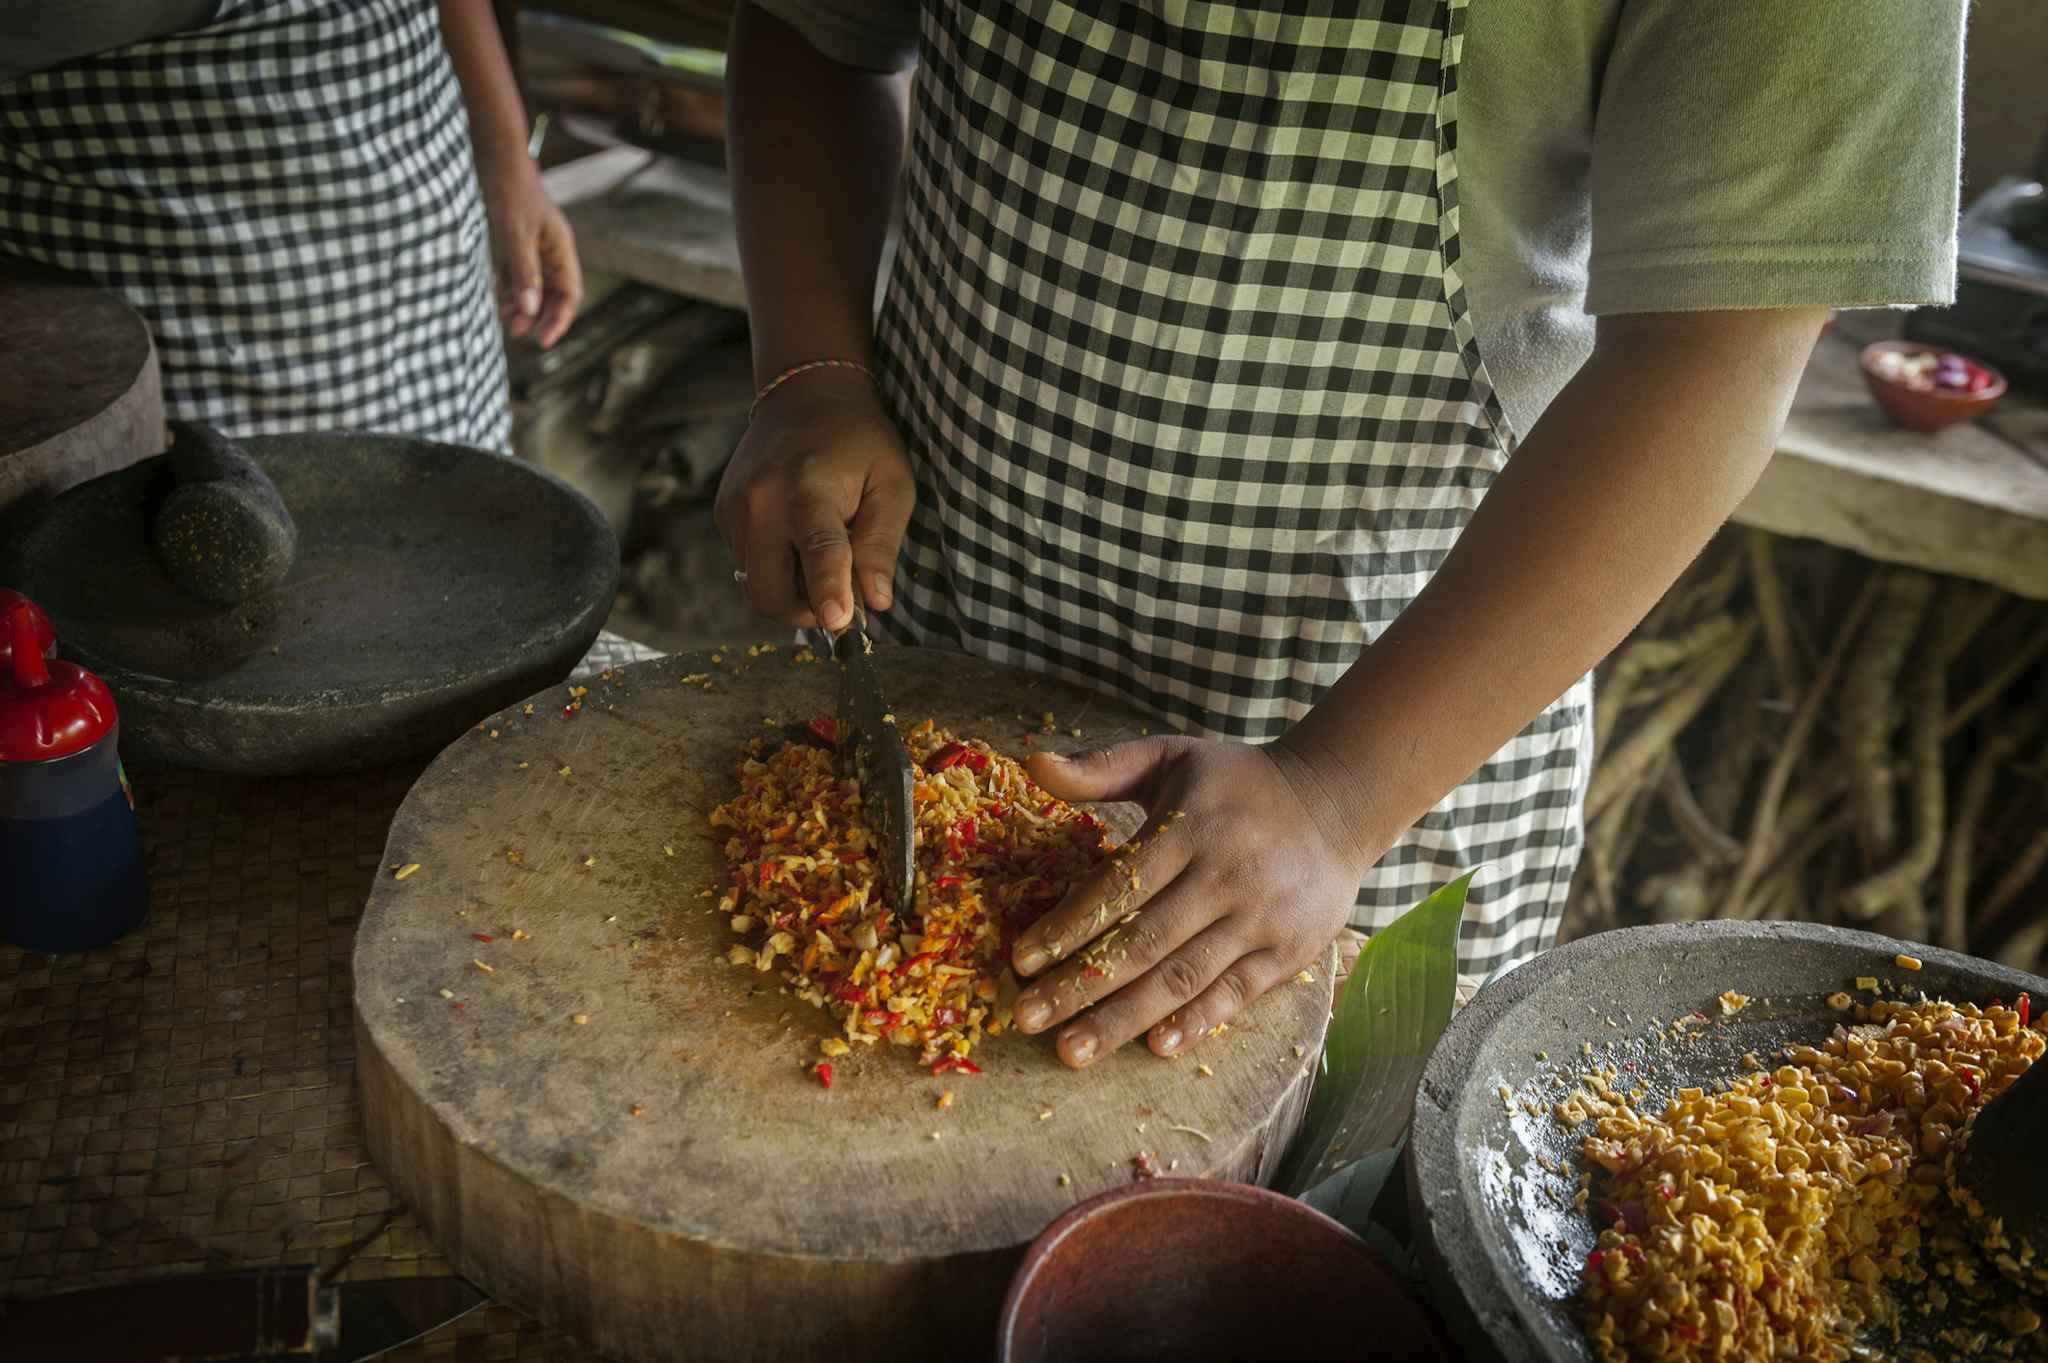 Local chopping vegetables in Bali, Indonesia